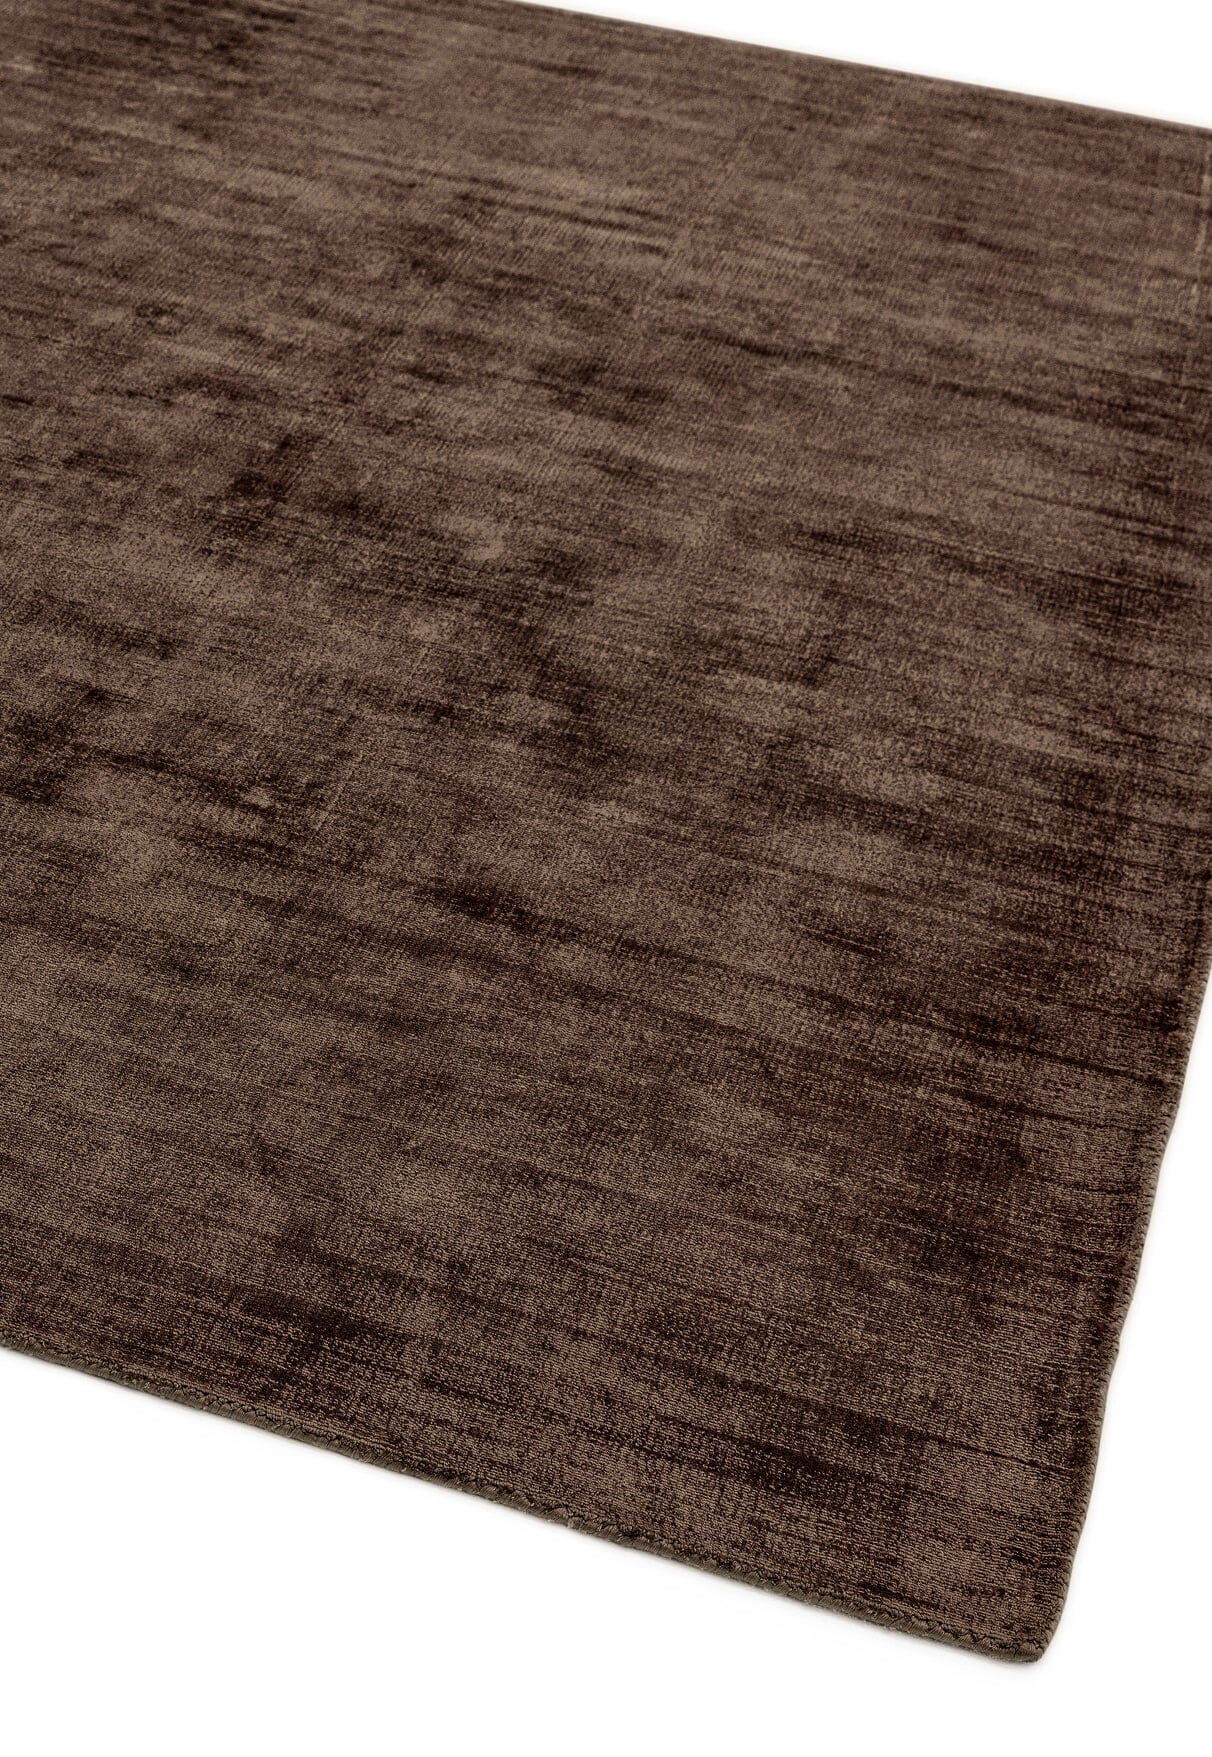  Asiatic Carpets-Asiatic Carpets Blade Hand Woven Runner Chocolate - 66 x 240cm-Brown 861 